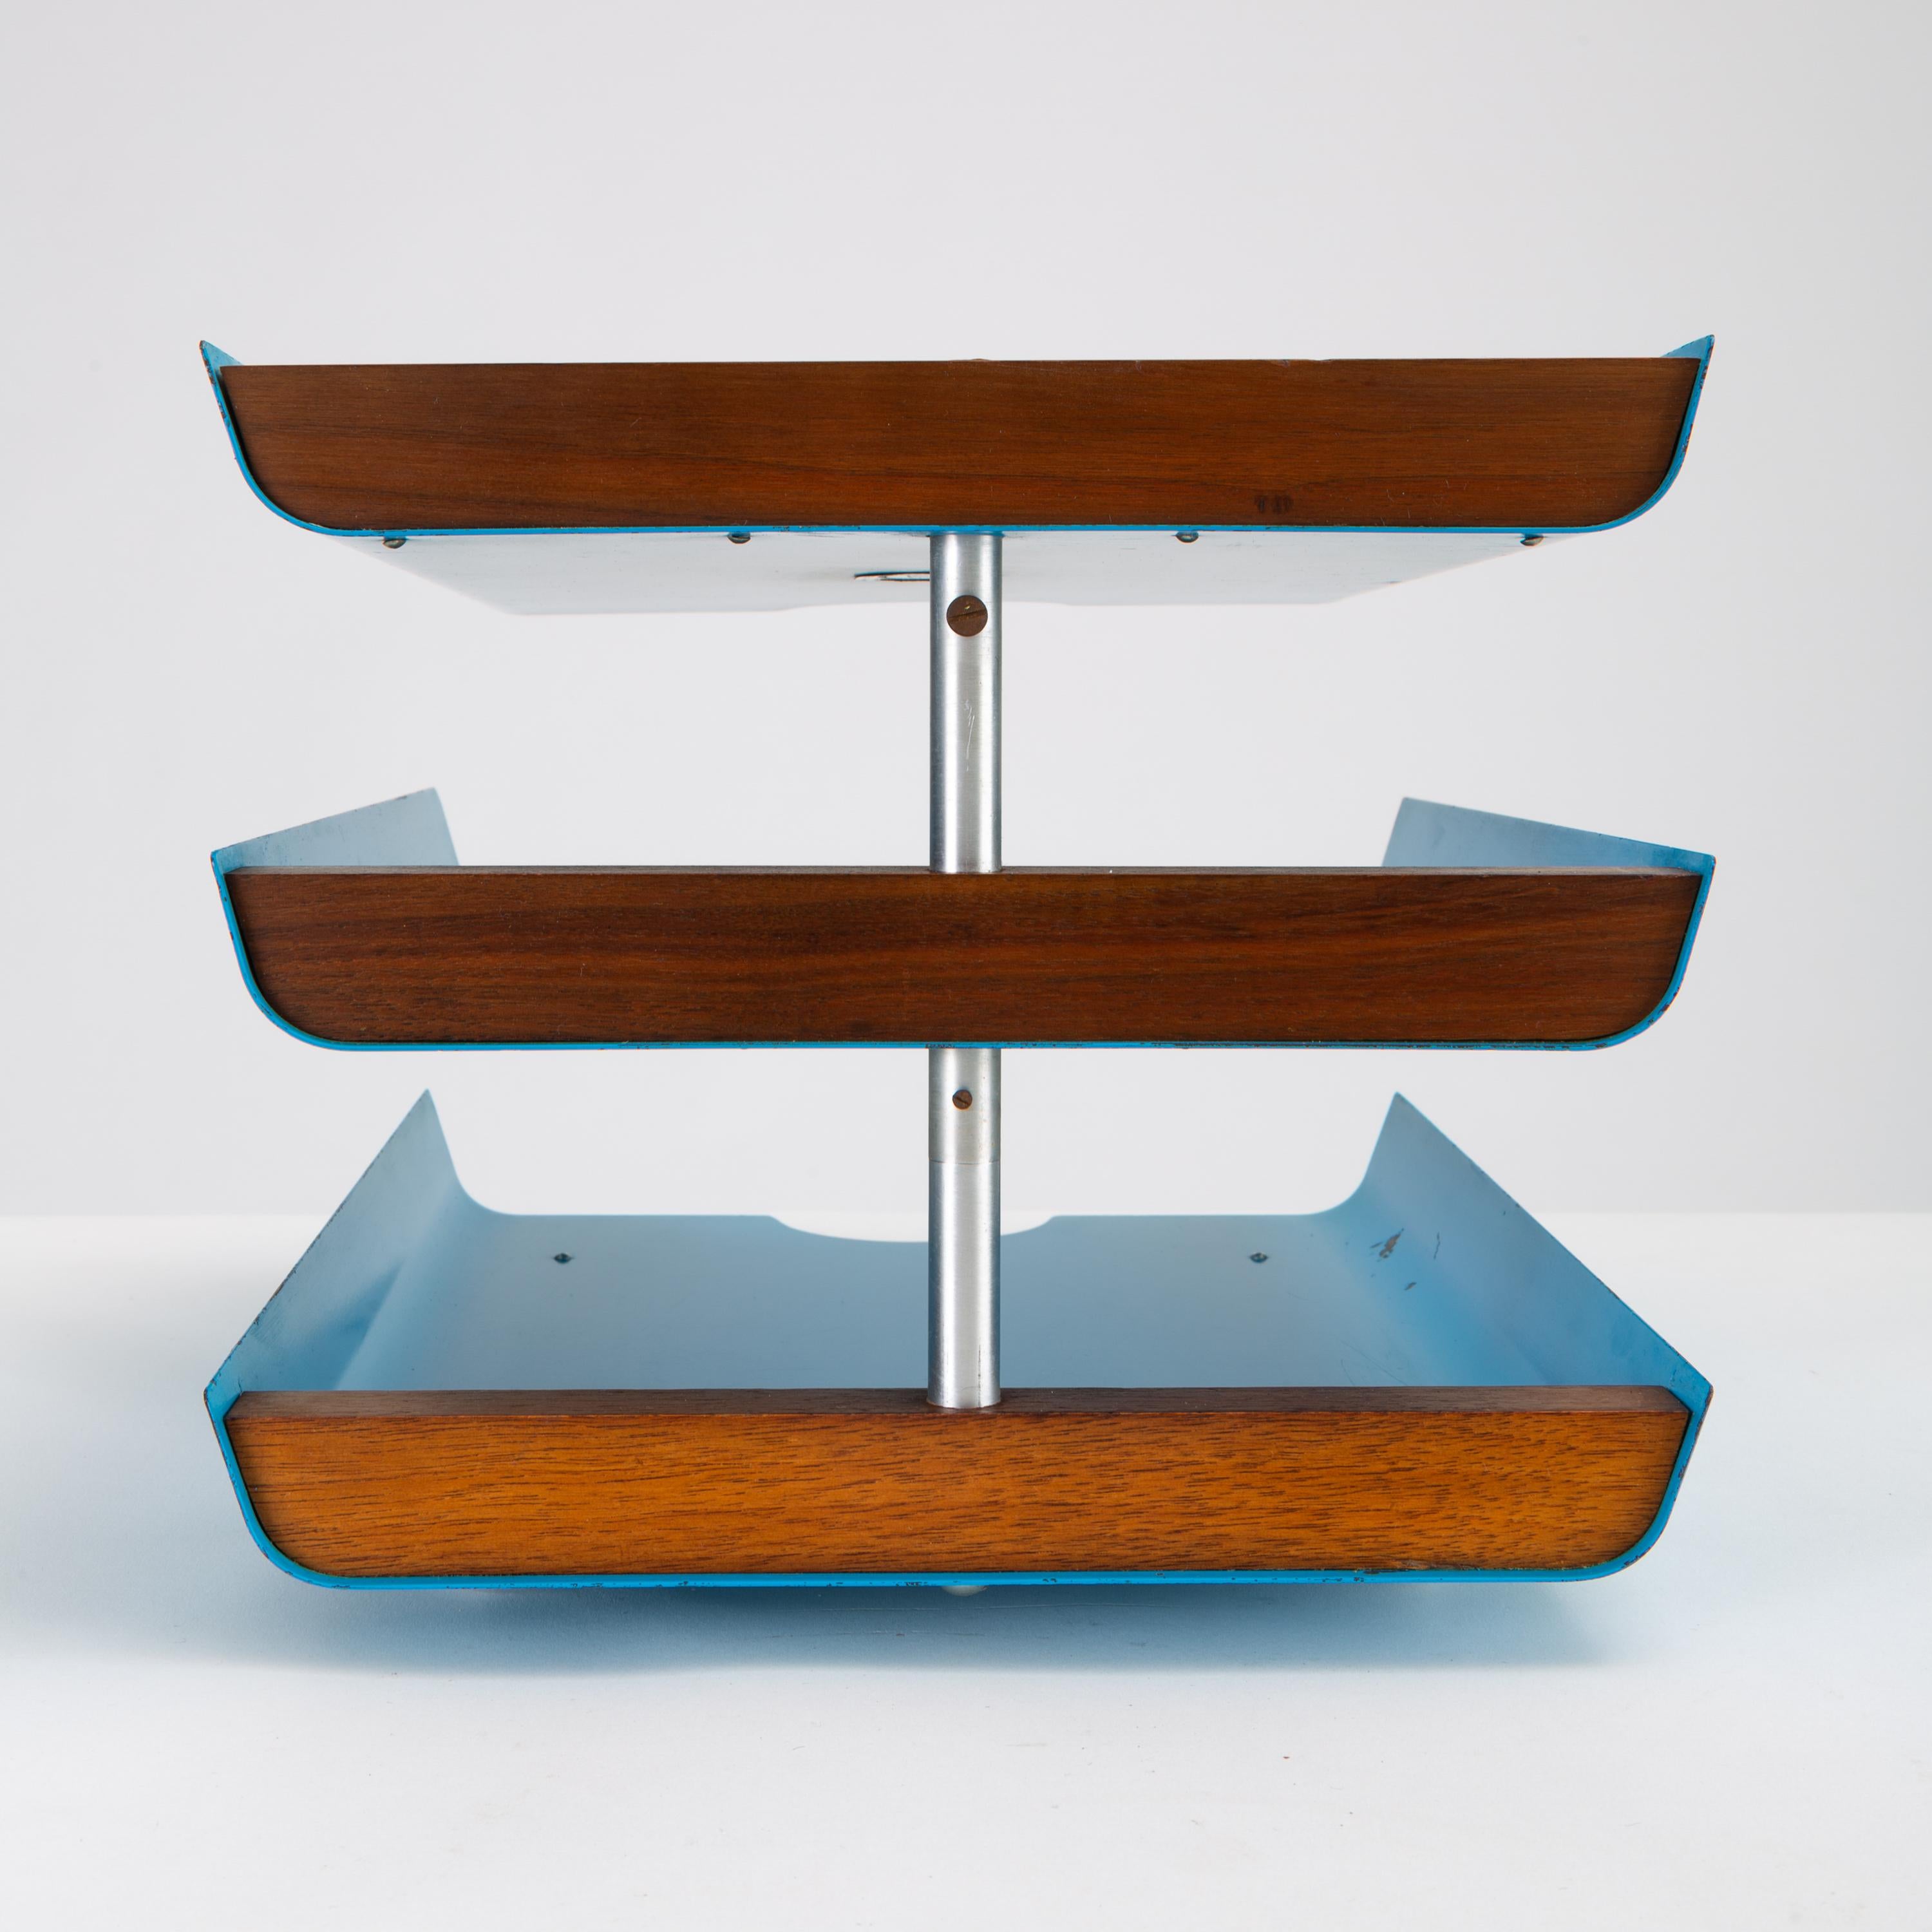 American Peter Pepper Products Three-Tiered Paper Tray in Original Blue Enamel